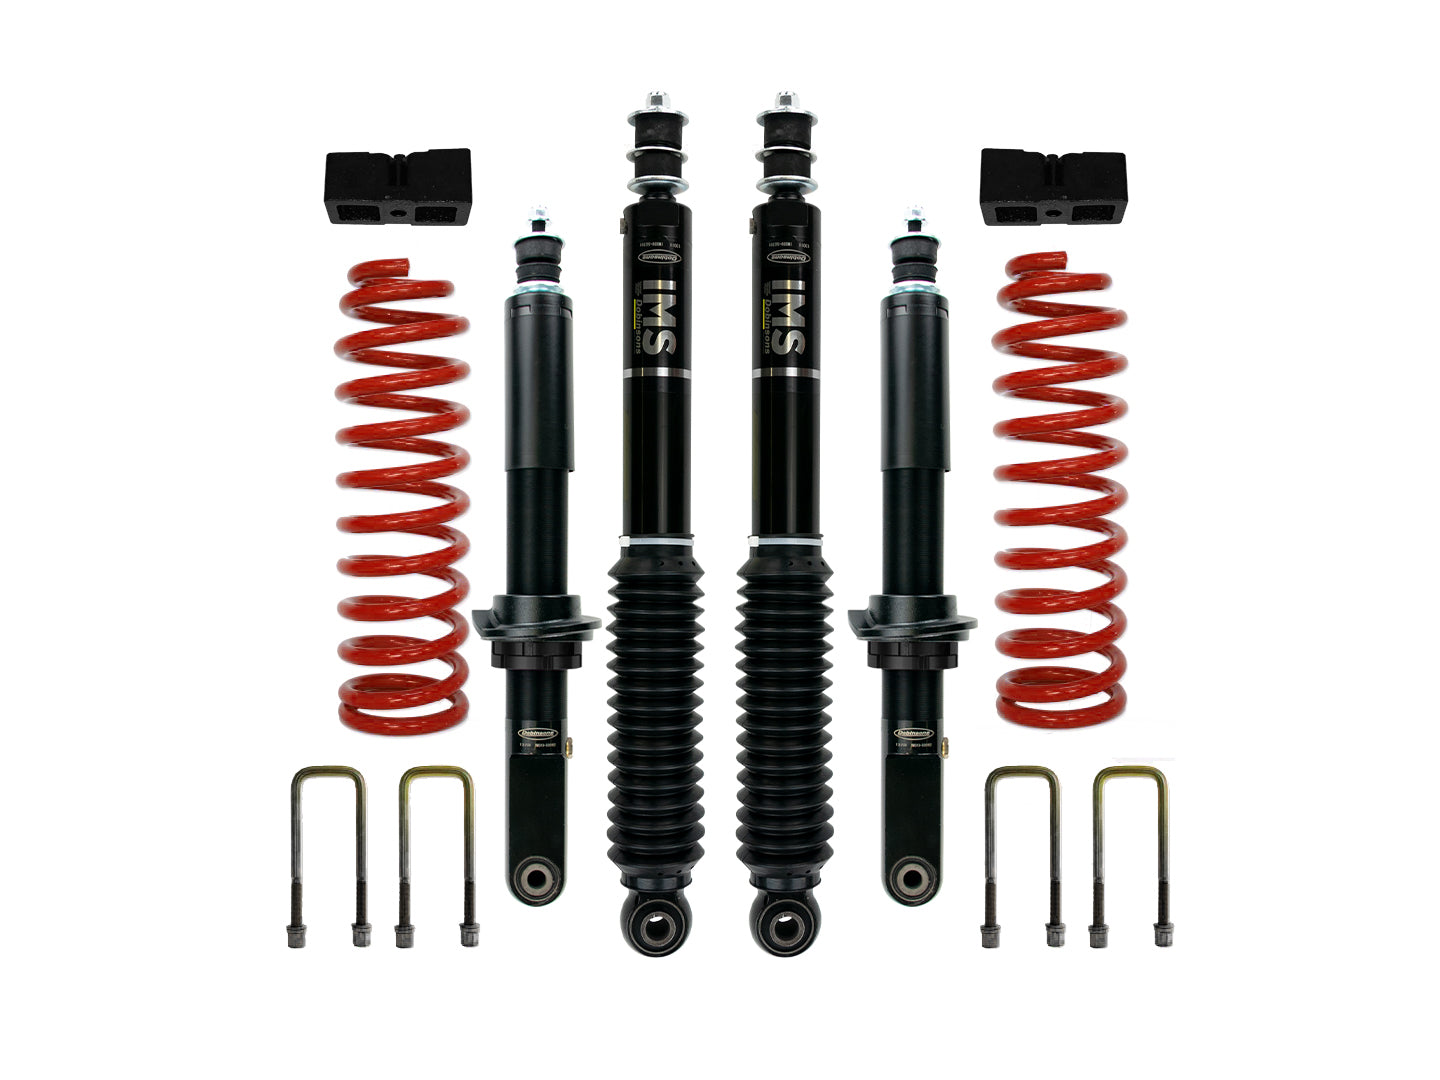 Dobinsons 2.0" to 3.0" IMS Lift Kit for Toyota Hilux Revo Dual Cab 2015 and on with Quick Ride Rear